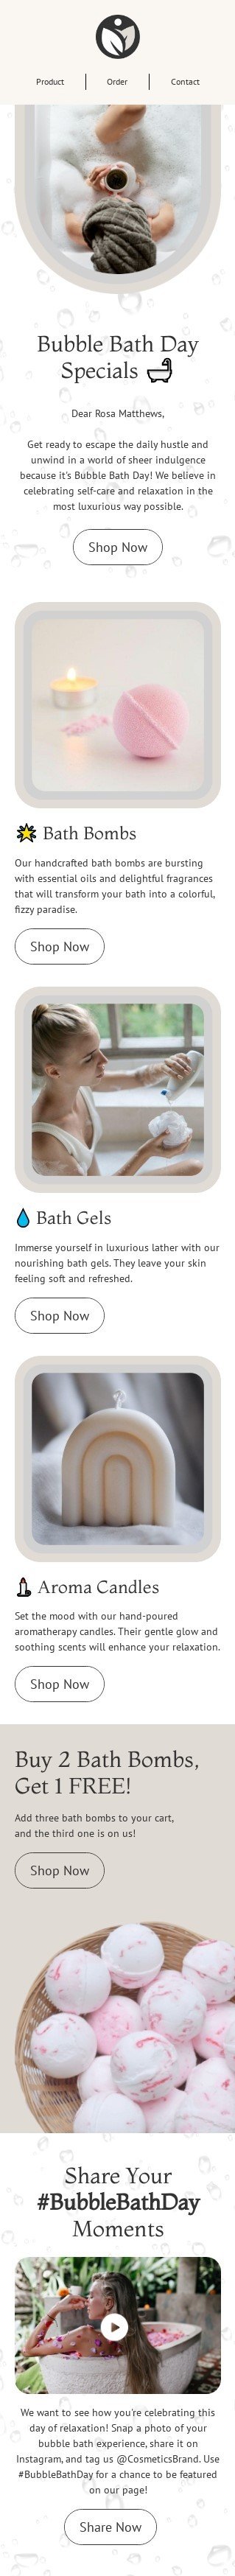 Bubble Bath Day email template "Bubble Bath Day moments" for beauty & personal care industry mobile view